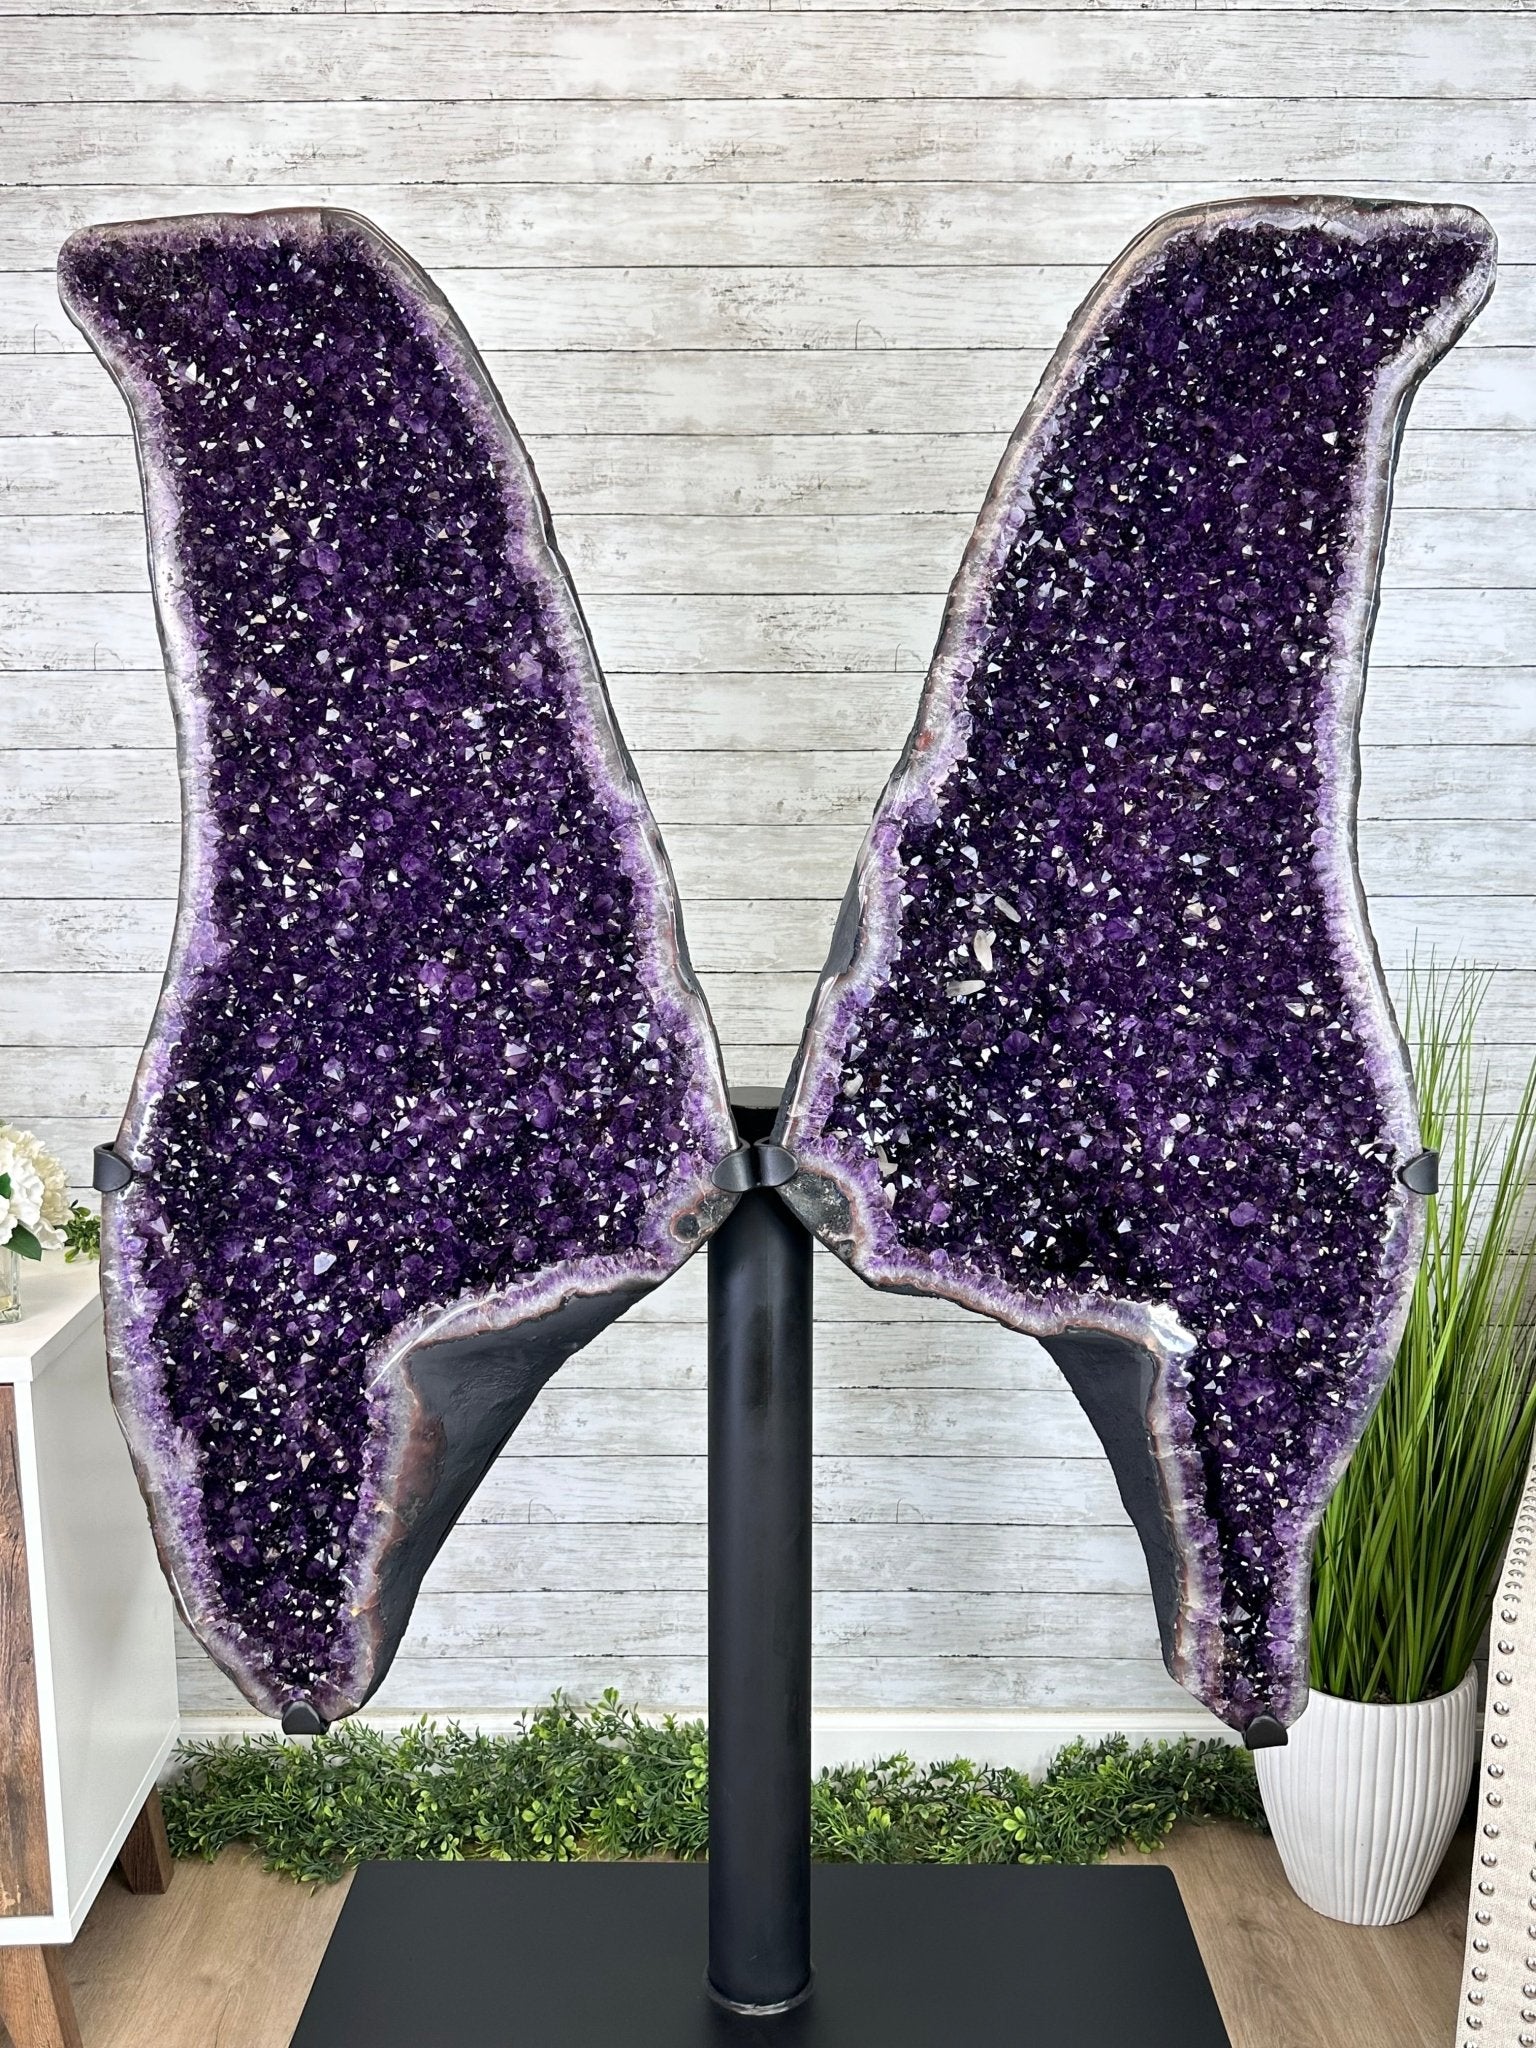 Large Super Quality Amethyst Wings on a Metal Stand, 503 lbs, 71" Tall #5493-0046 - Brazil GemsBrazil GemsLarge Super Quality Amethyst Wings on a Metal Stand, 503 lbs, 71" Tall #5493-0046Amethyst Butterfly Wings5493-0046